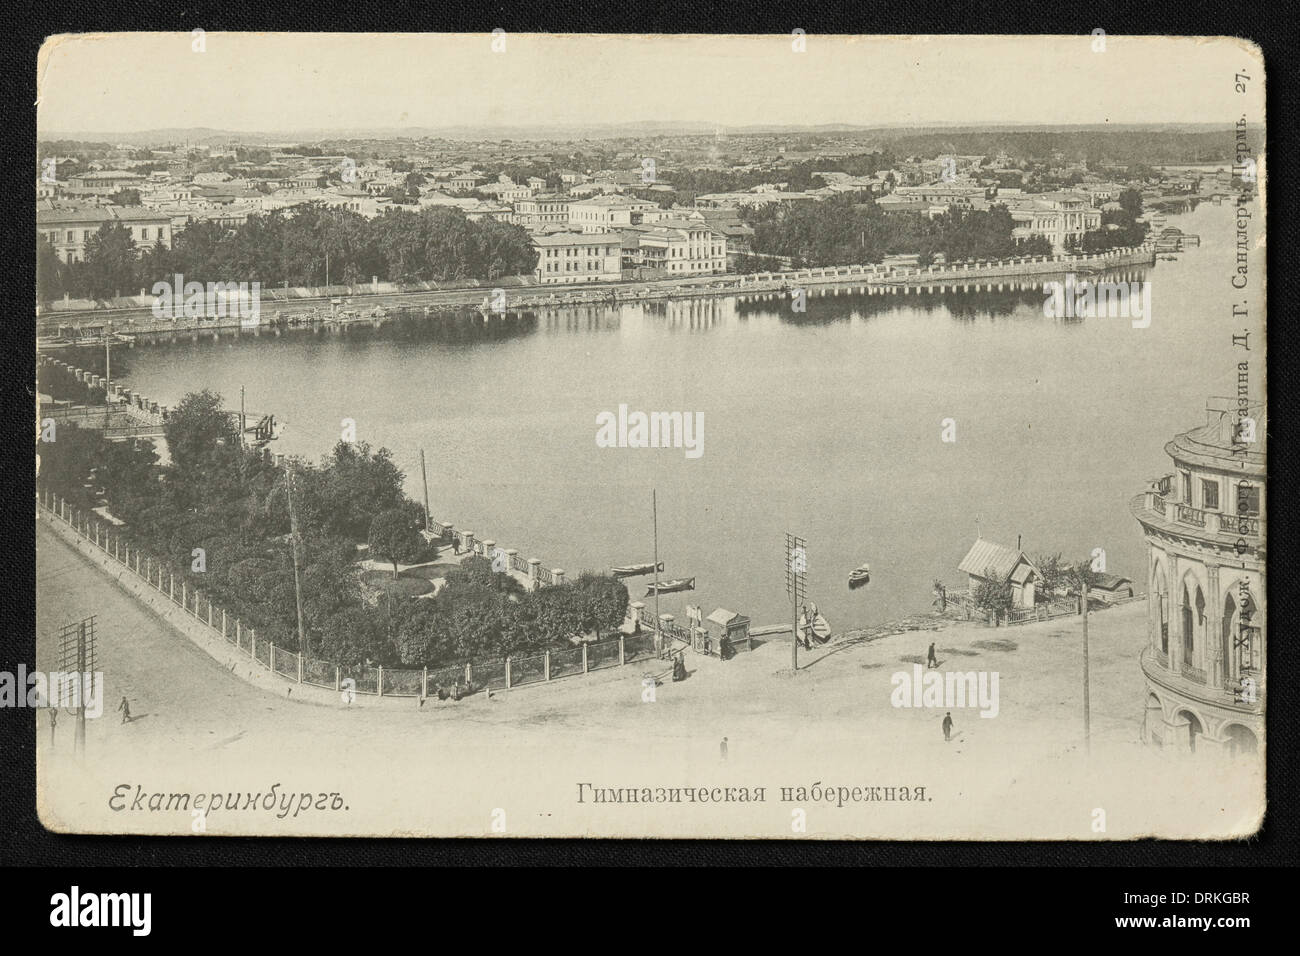 The City Pond (Gorodskoy Pond) on the Iset River in Yekaterinburg, Russian Empire. Black and white vintage photograph by an unknown photographer dated from the beginning of the 20th century issued in the Russian vintage postcard published by D.G. Sandler, Perm, Russia. Text in Russian: Yekaterinburg. Gimnazicheskaya Embankment (Gymnasium Embankment). Courtesy of the Azoor Postcard Collection. Stock Photo